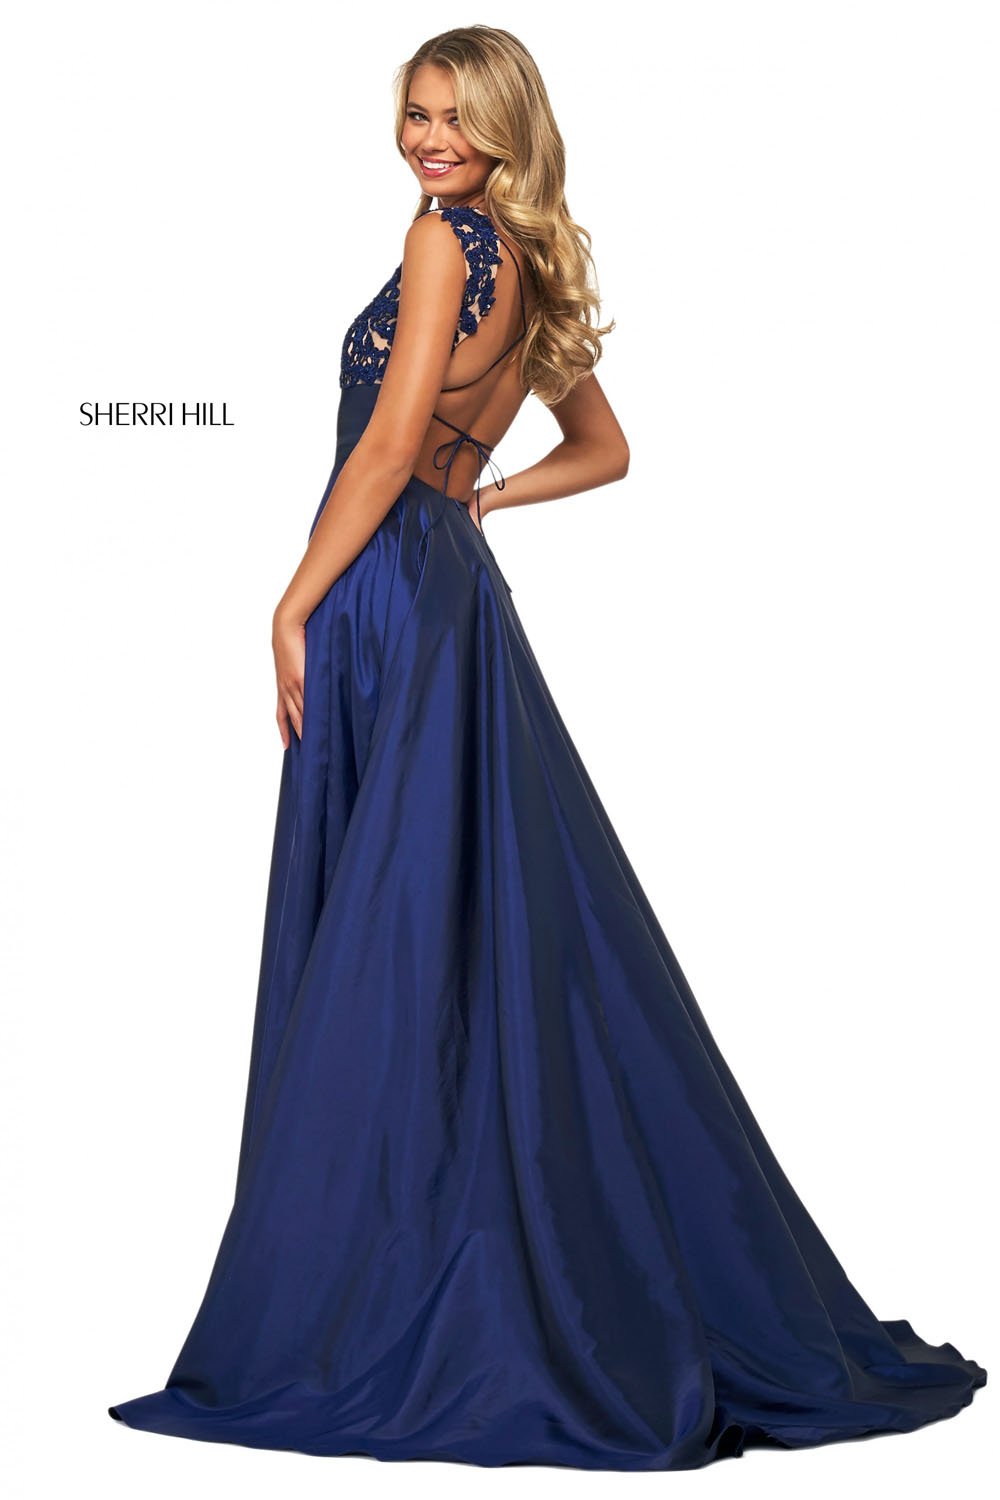 Sherri Hill 53767 dress images in these colors: Coral, Red, Aqua, Yellow, Pink, Navy.